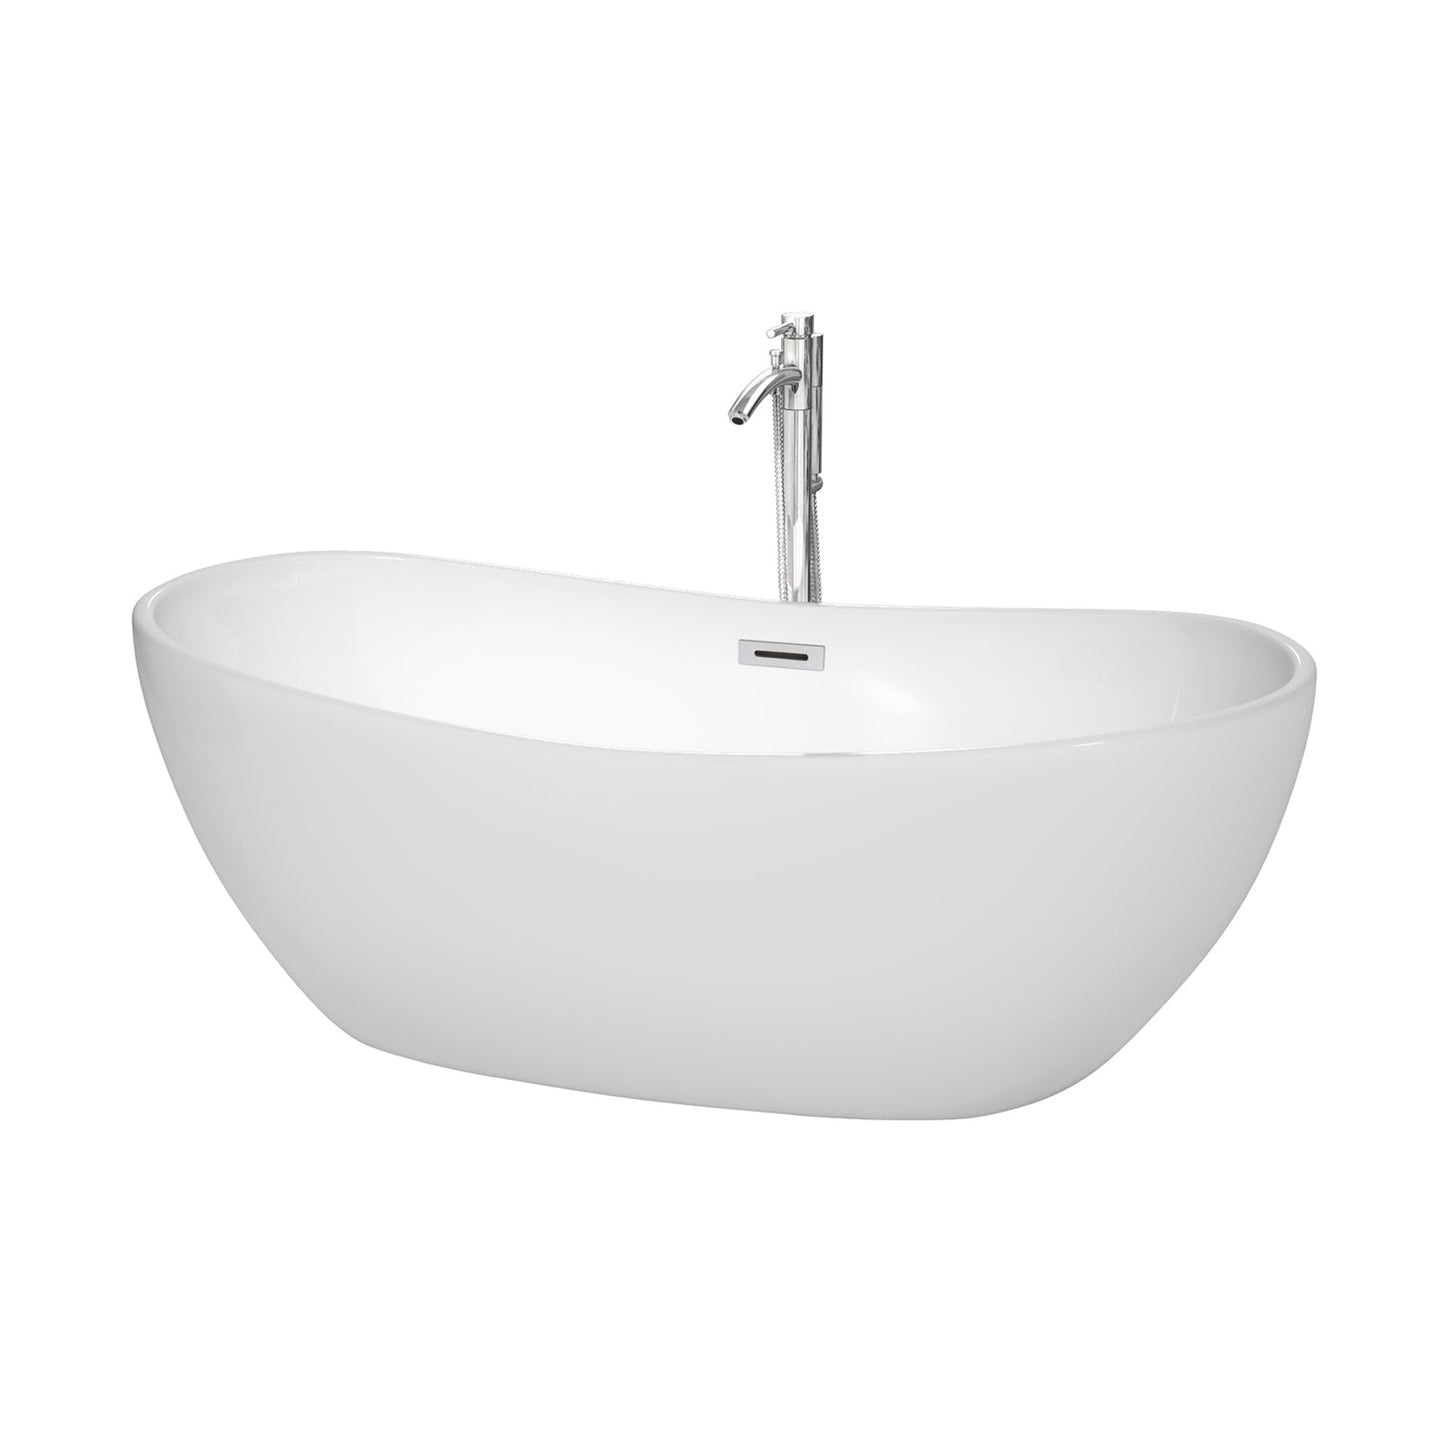 Wyndham Collection Rebecca 65" Freestanding Bathtub in White With Floor Mounted Faucet, Drain and Overflow Trim in Polished Chrome